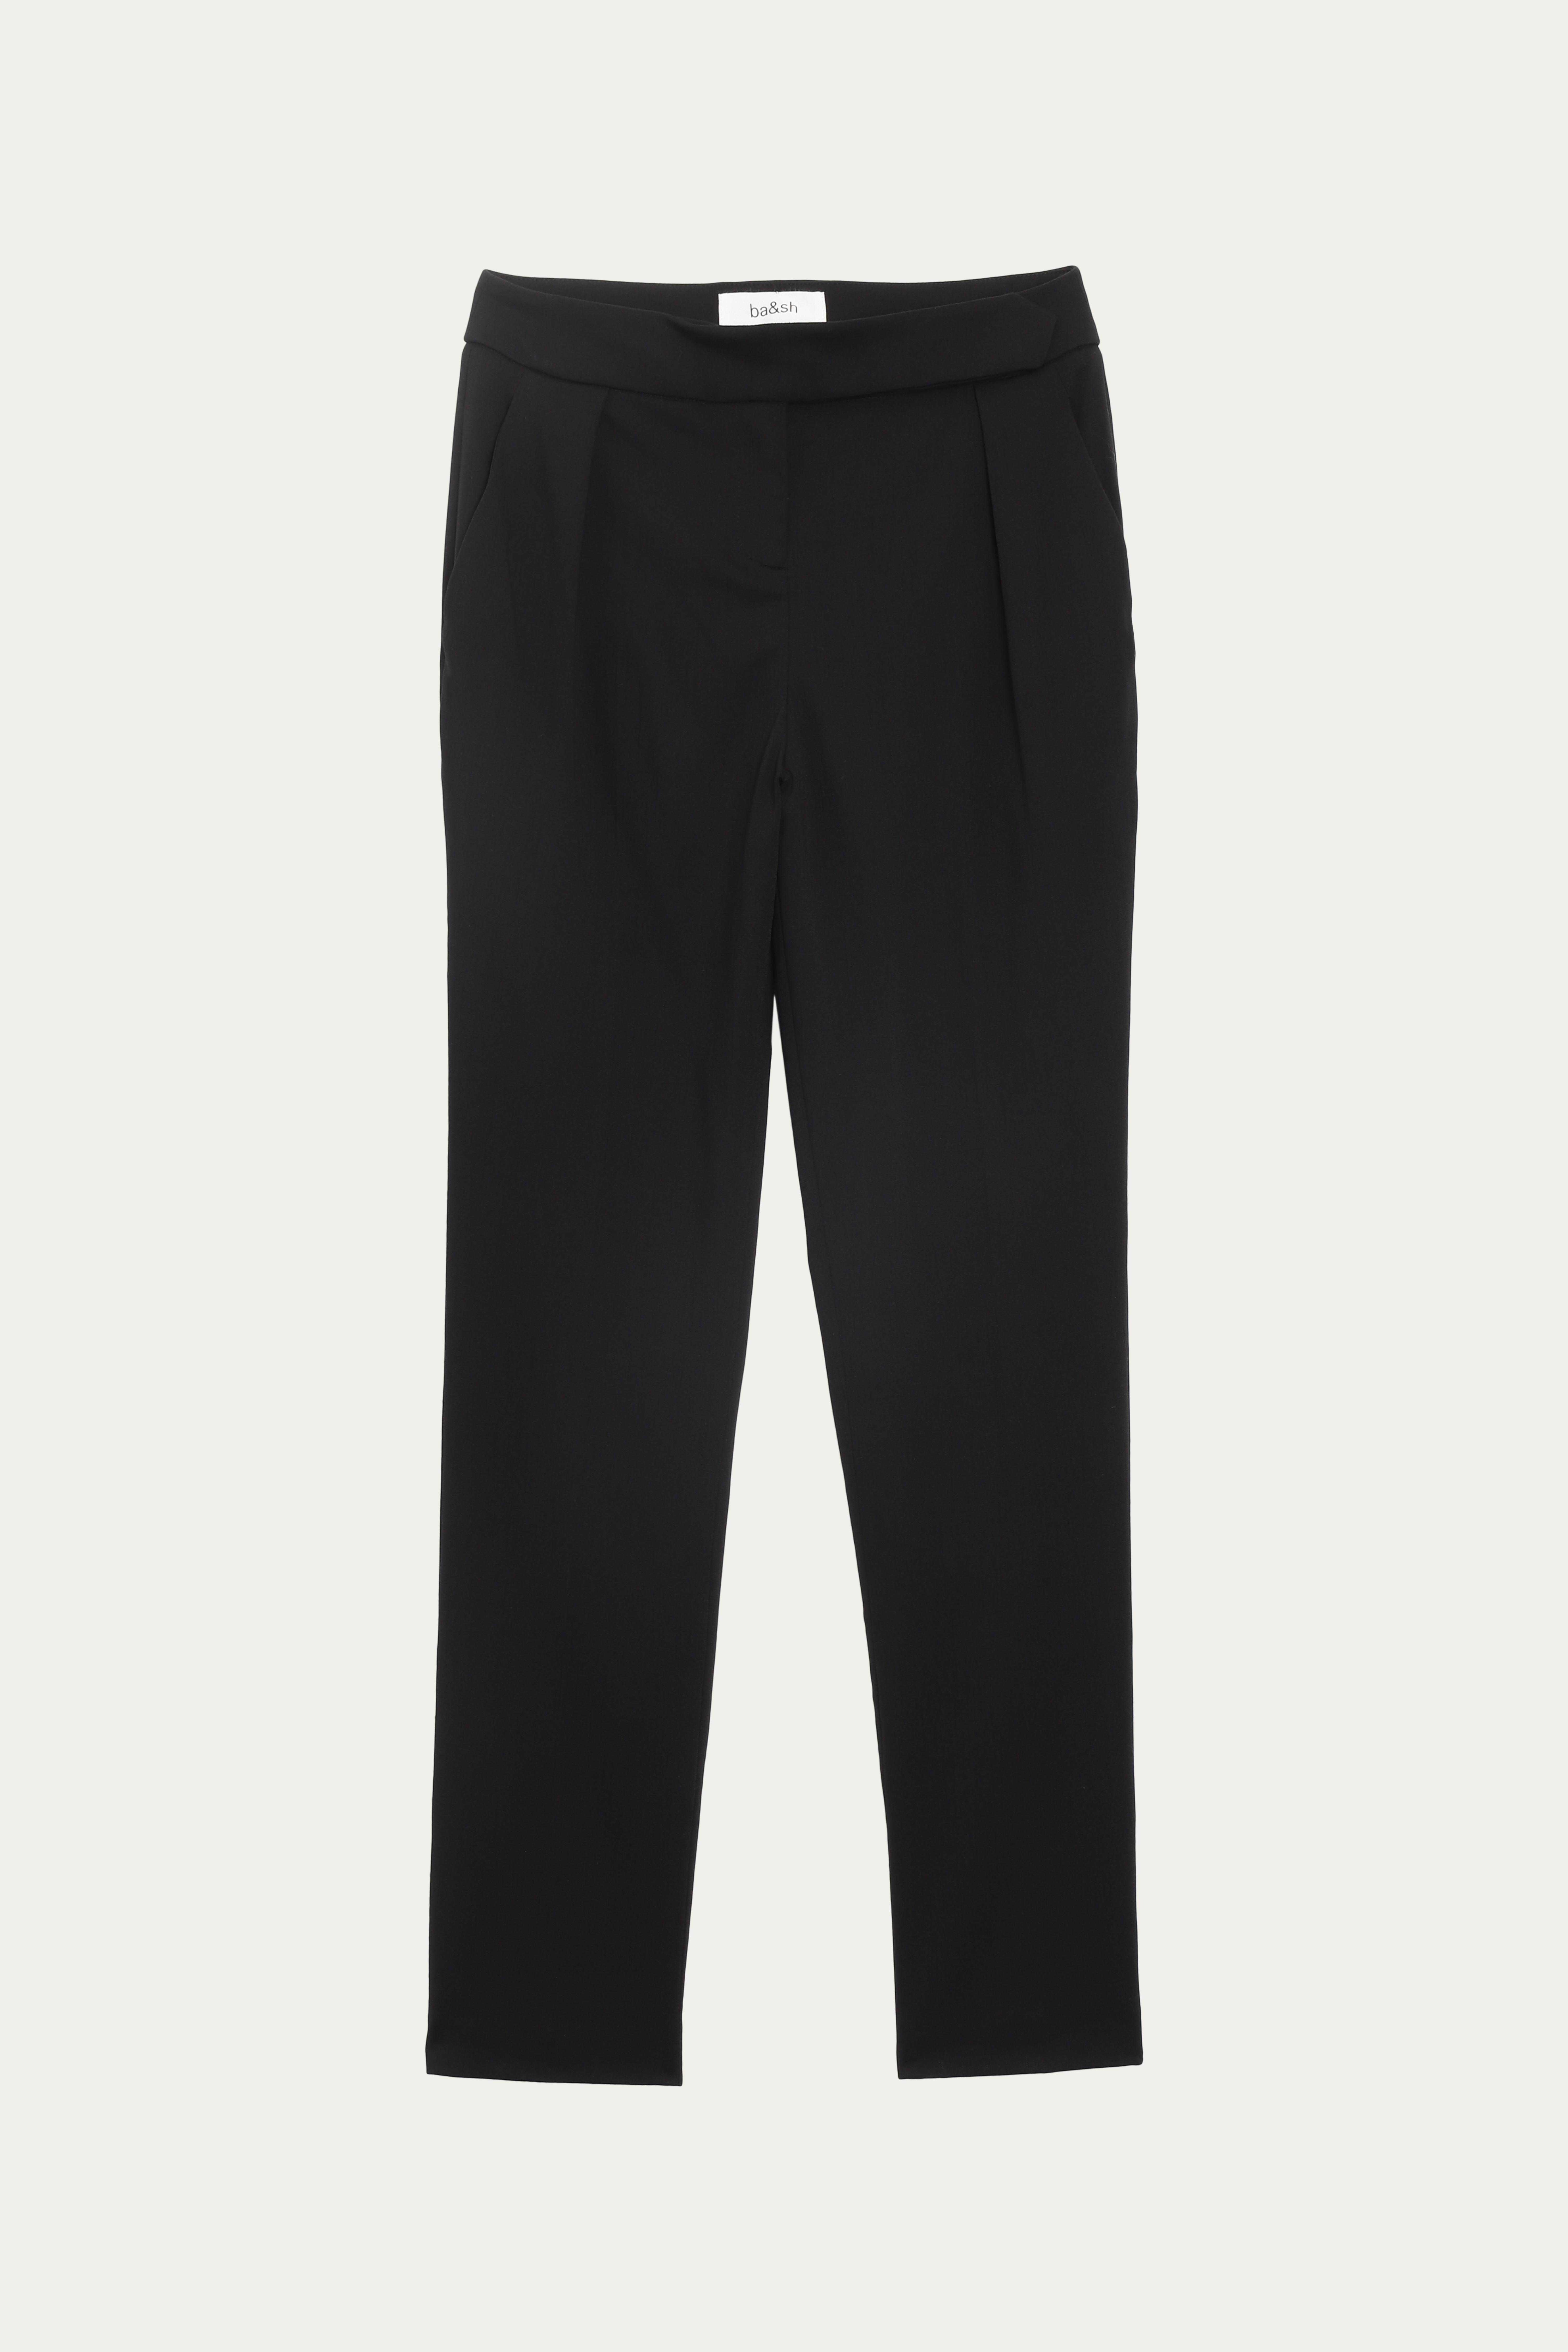 Ba&sh Synthetic Prince Pants in Black - Lyst